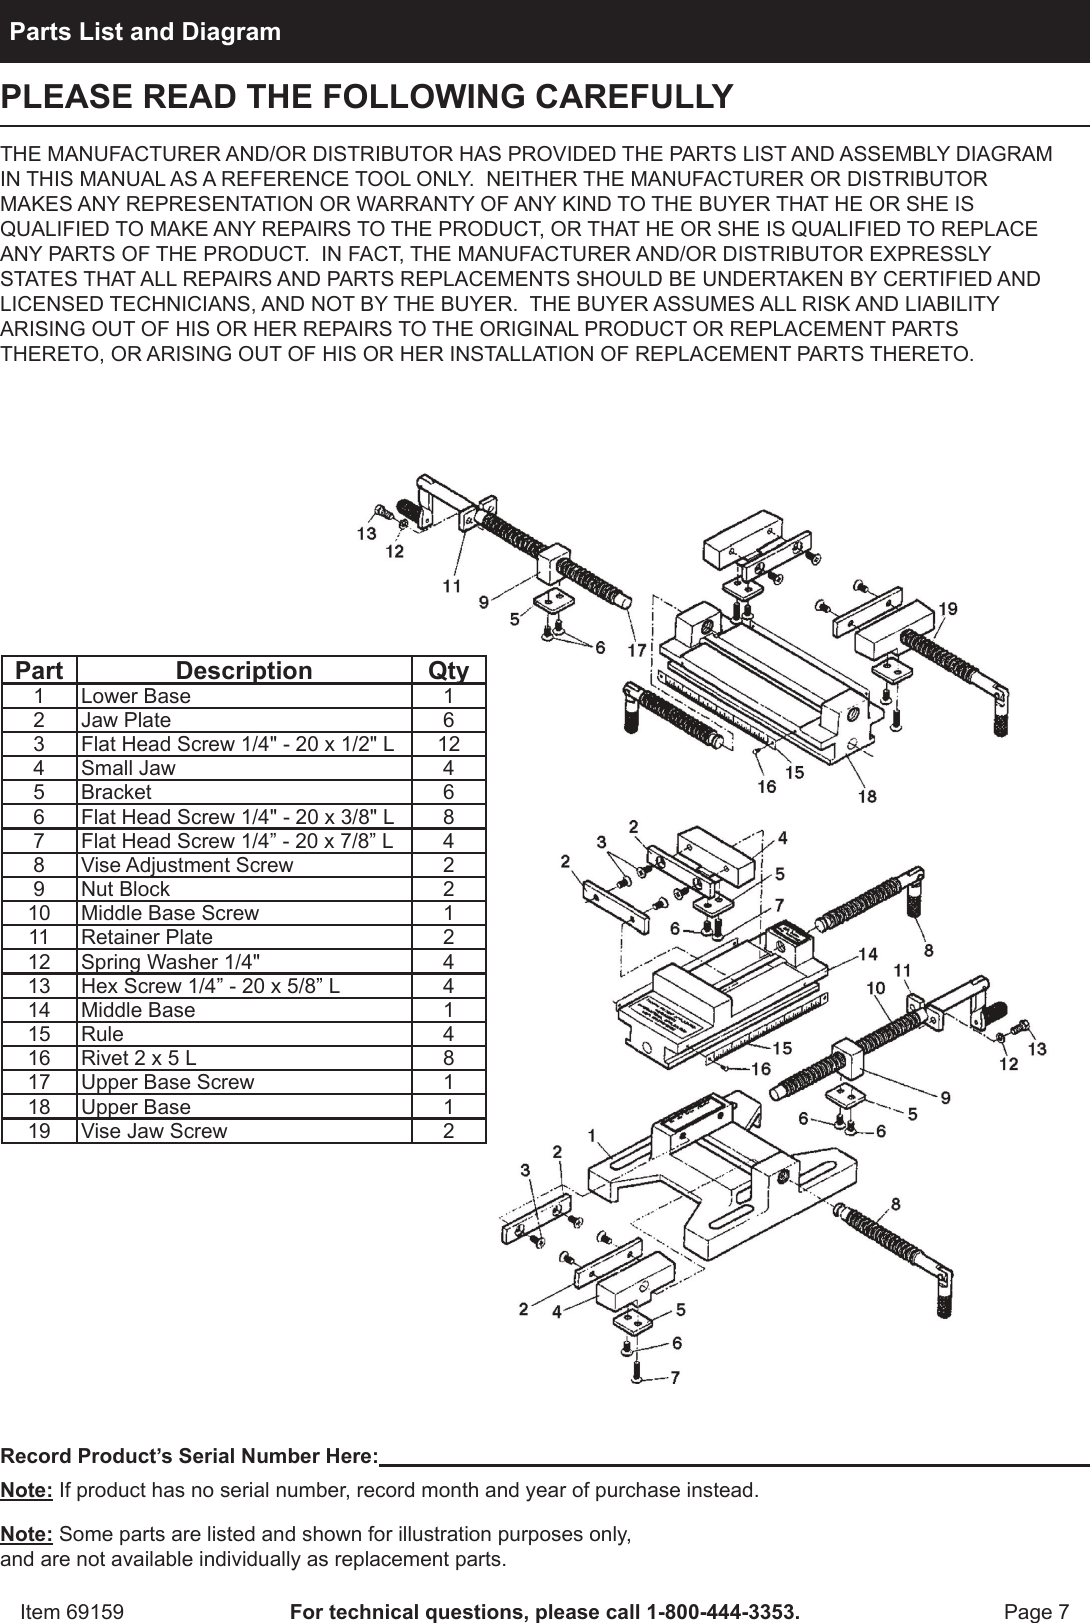 Page 7 of 8 - Harbor-Freight Harbor-Freight-5-In-Rugged-Cast-Iron-Drill-Press-Milling-Vise-Product-Manual-  Harbor-freight-5-in-rugged-cast-iron-drill-press-milling-vise-product-manual